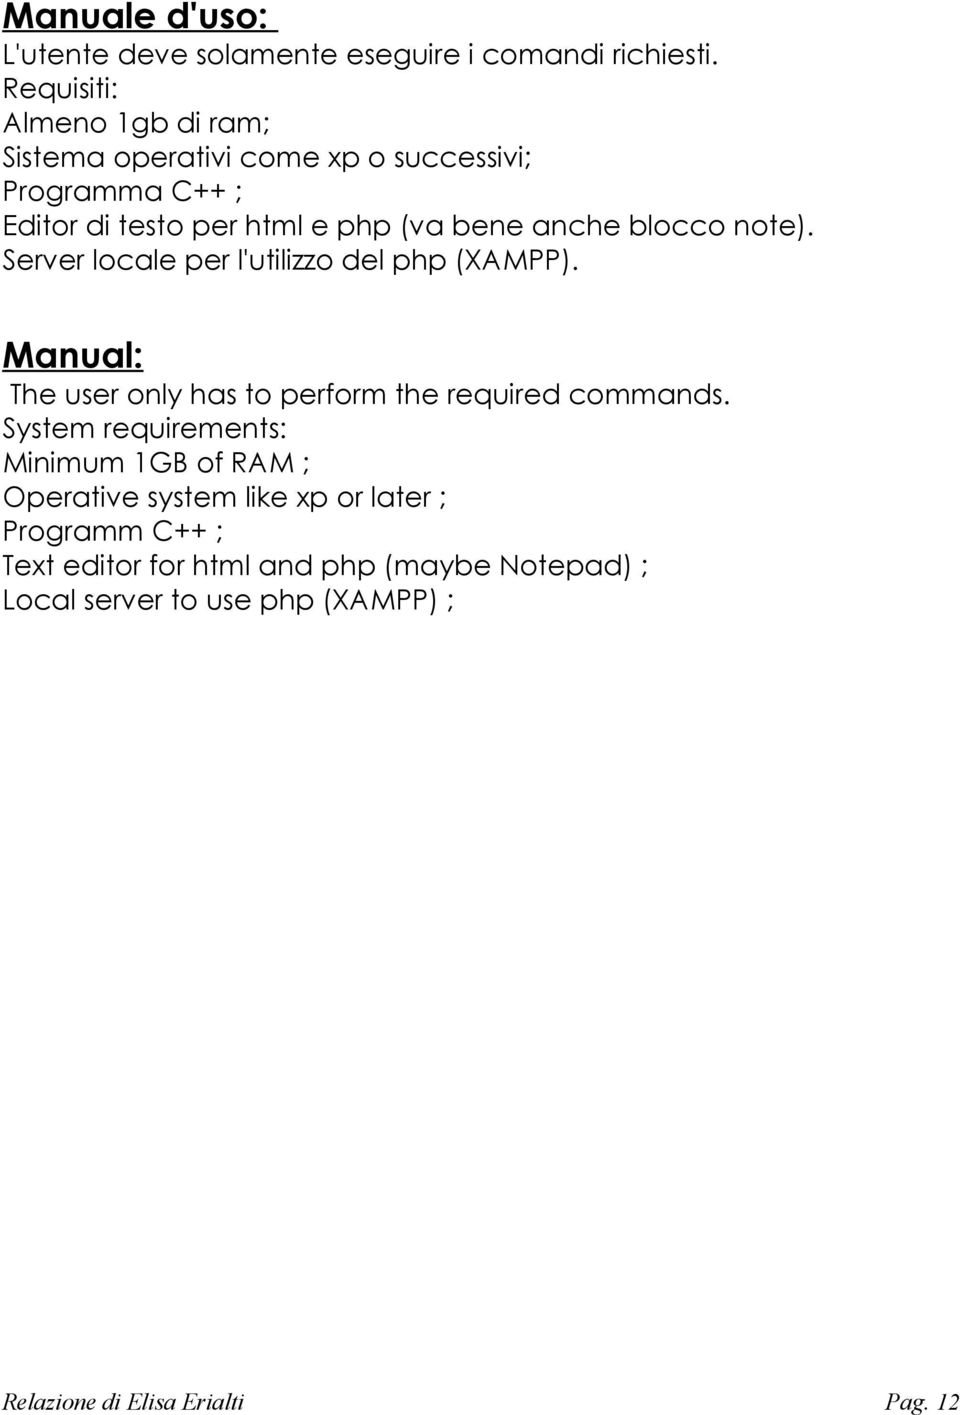 blocco note). Server locale per l'utilizzo del php (XAMPP). Manual: The user only has to perform the required commands.